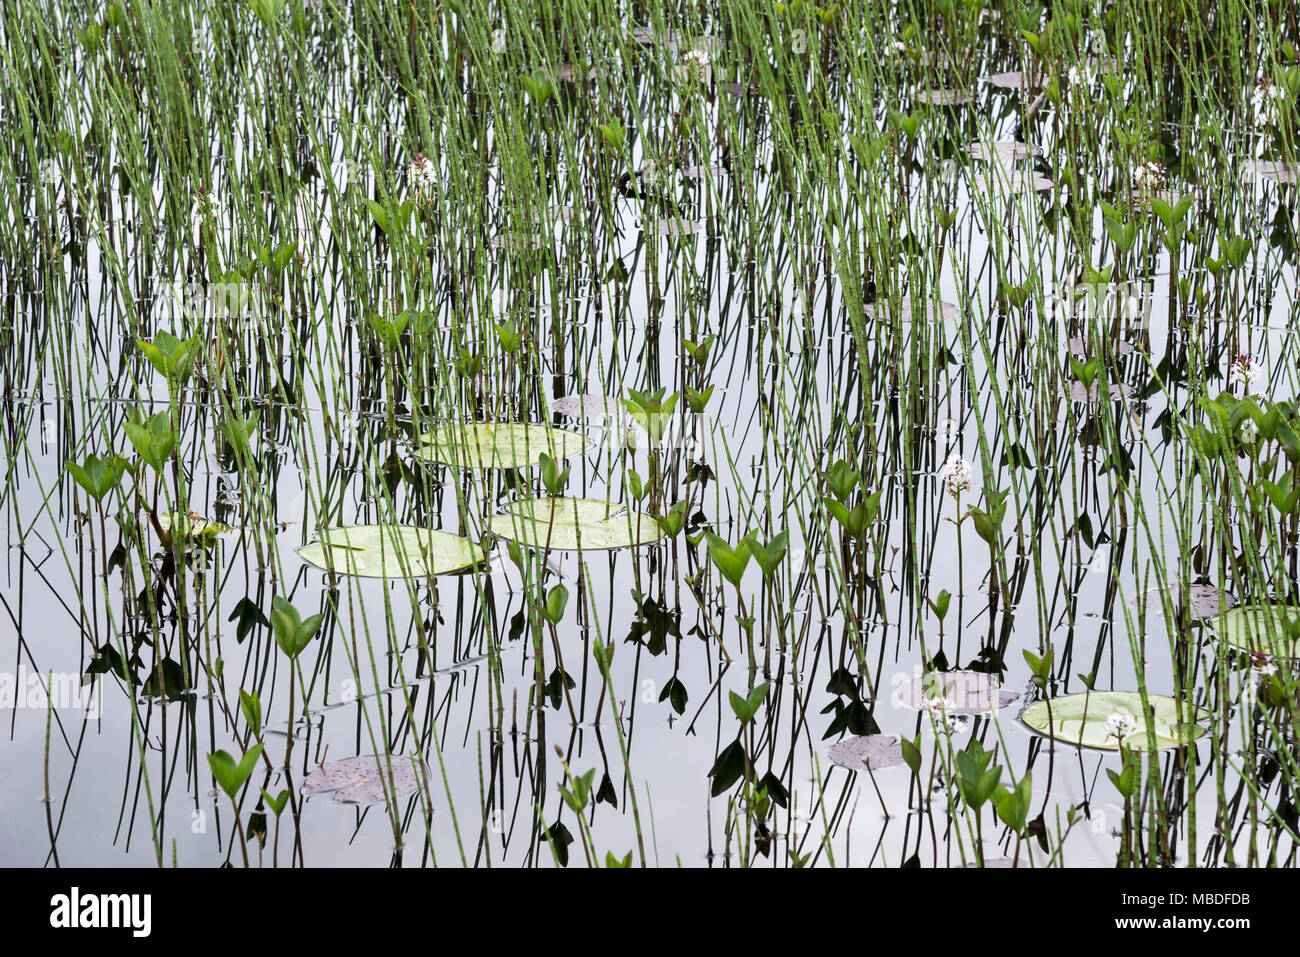 Llyn Tecwyn Isaf, a beautiful natural lake in the hills of Snowdonia, North Wales, UK. Close up of water lilies and equisetum (horsetail). Stock Photo